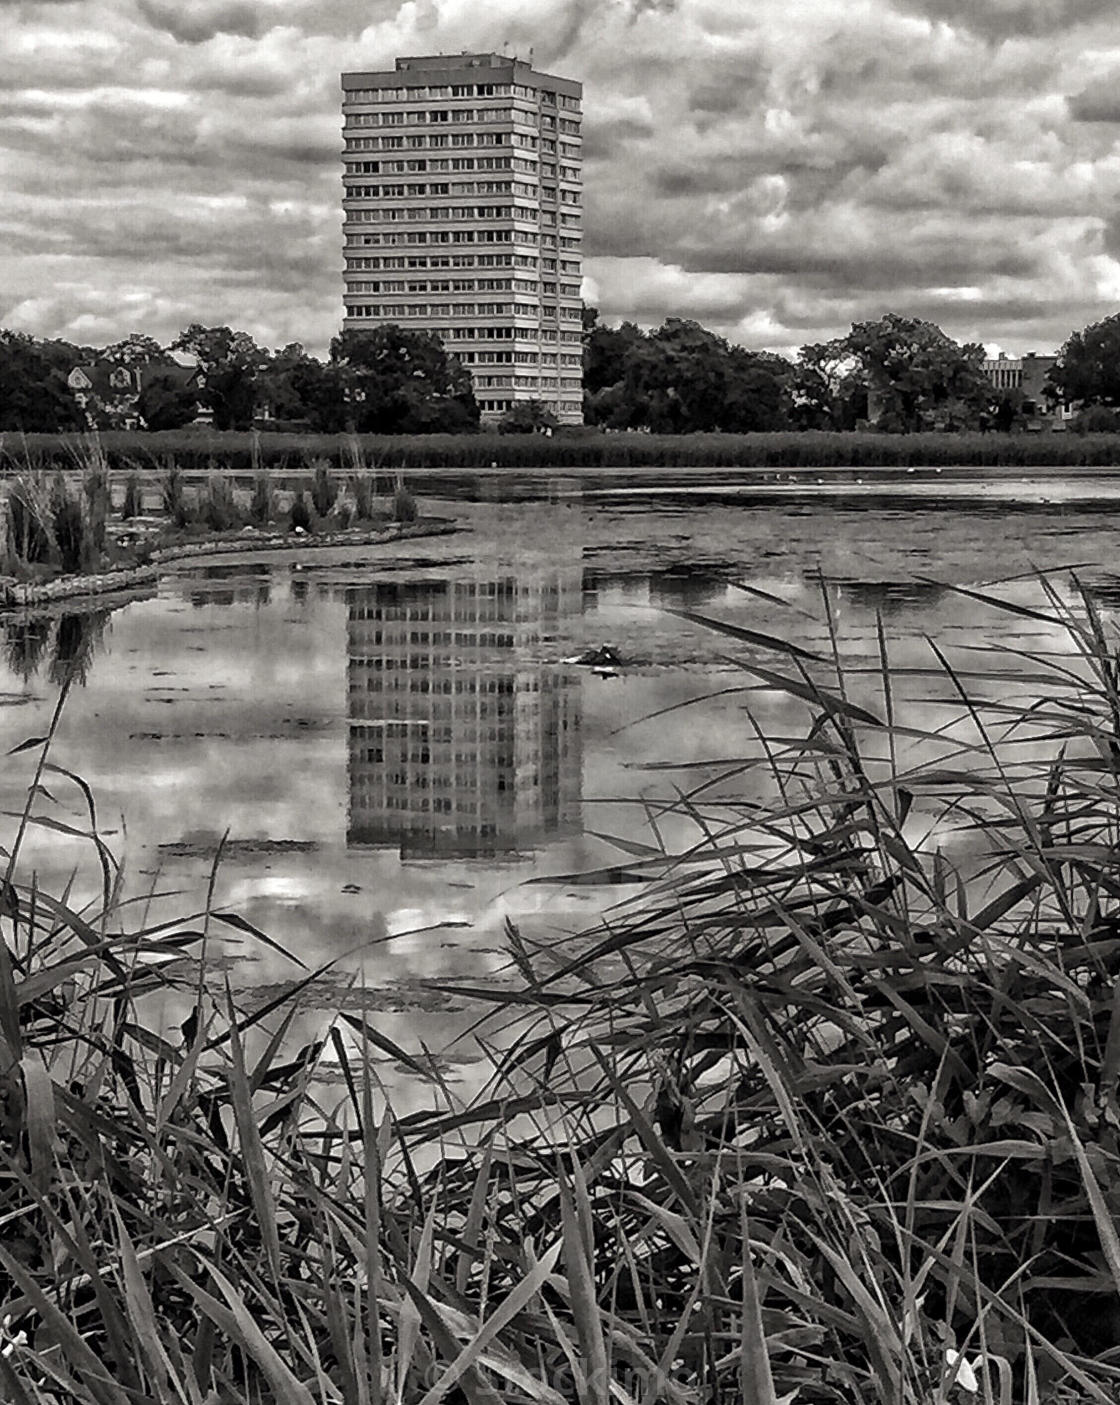 Urban Wildlife Reserve At The Woodberry Wetlands Hackney London U K License Download Or Print For 31 00 Photos Picfair